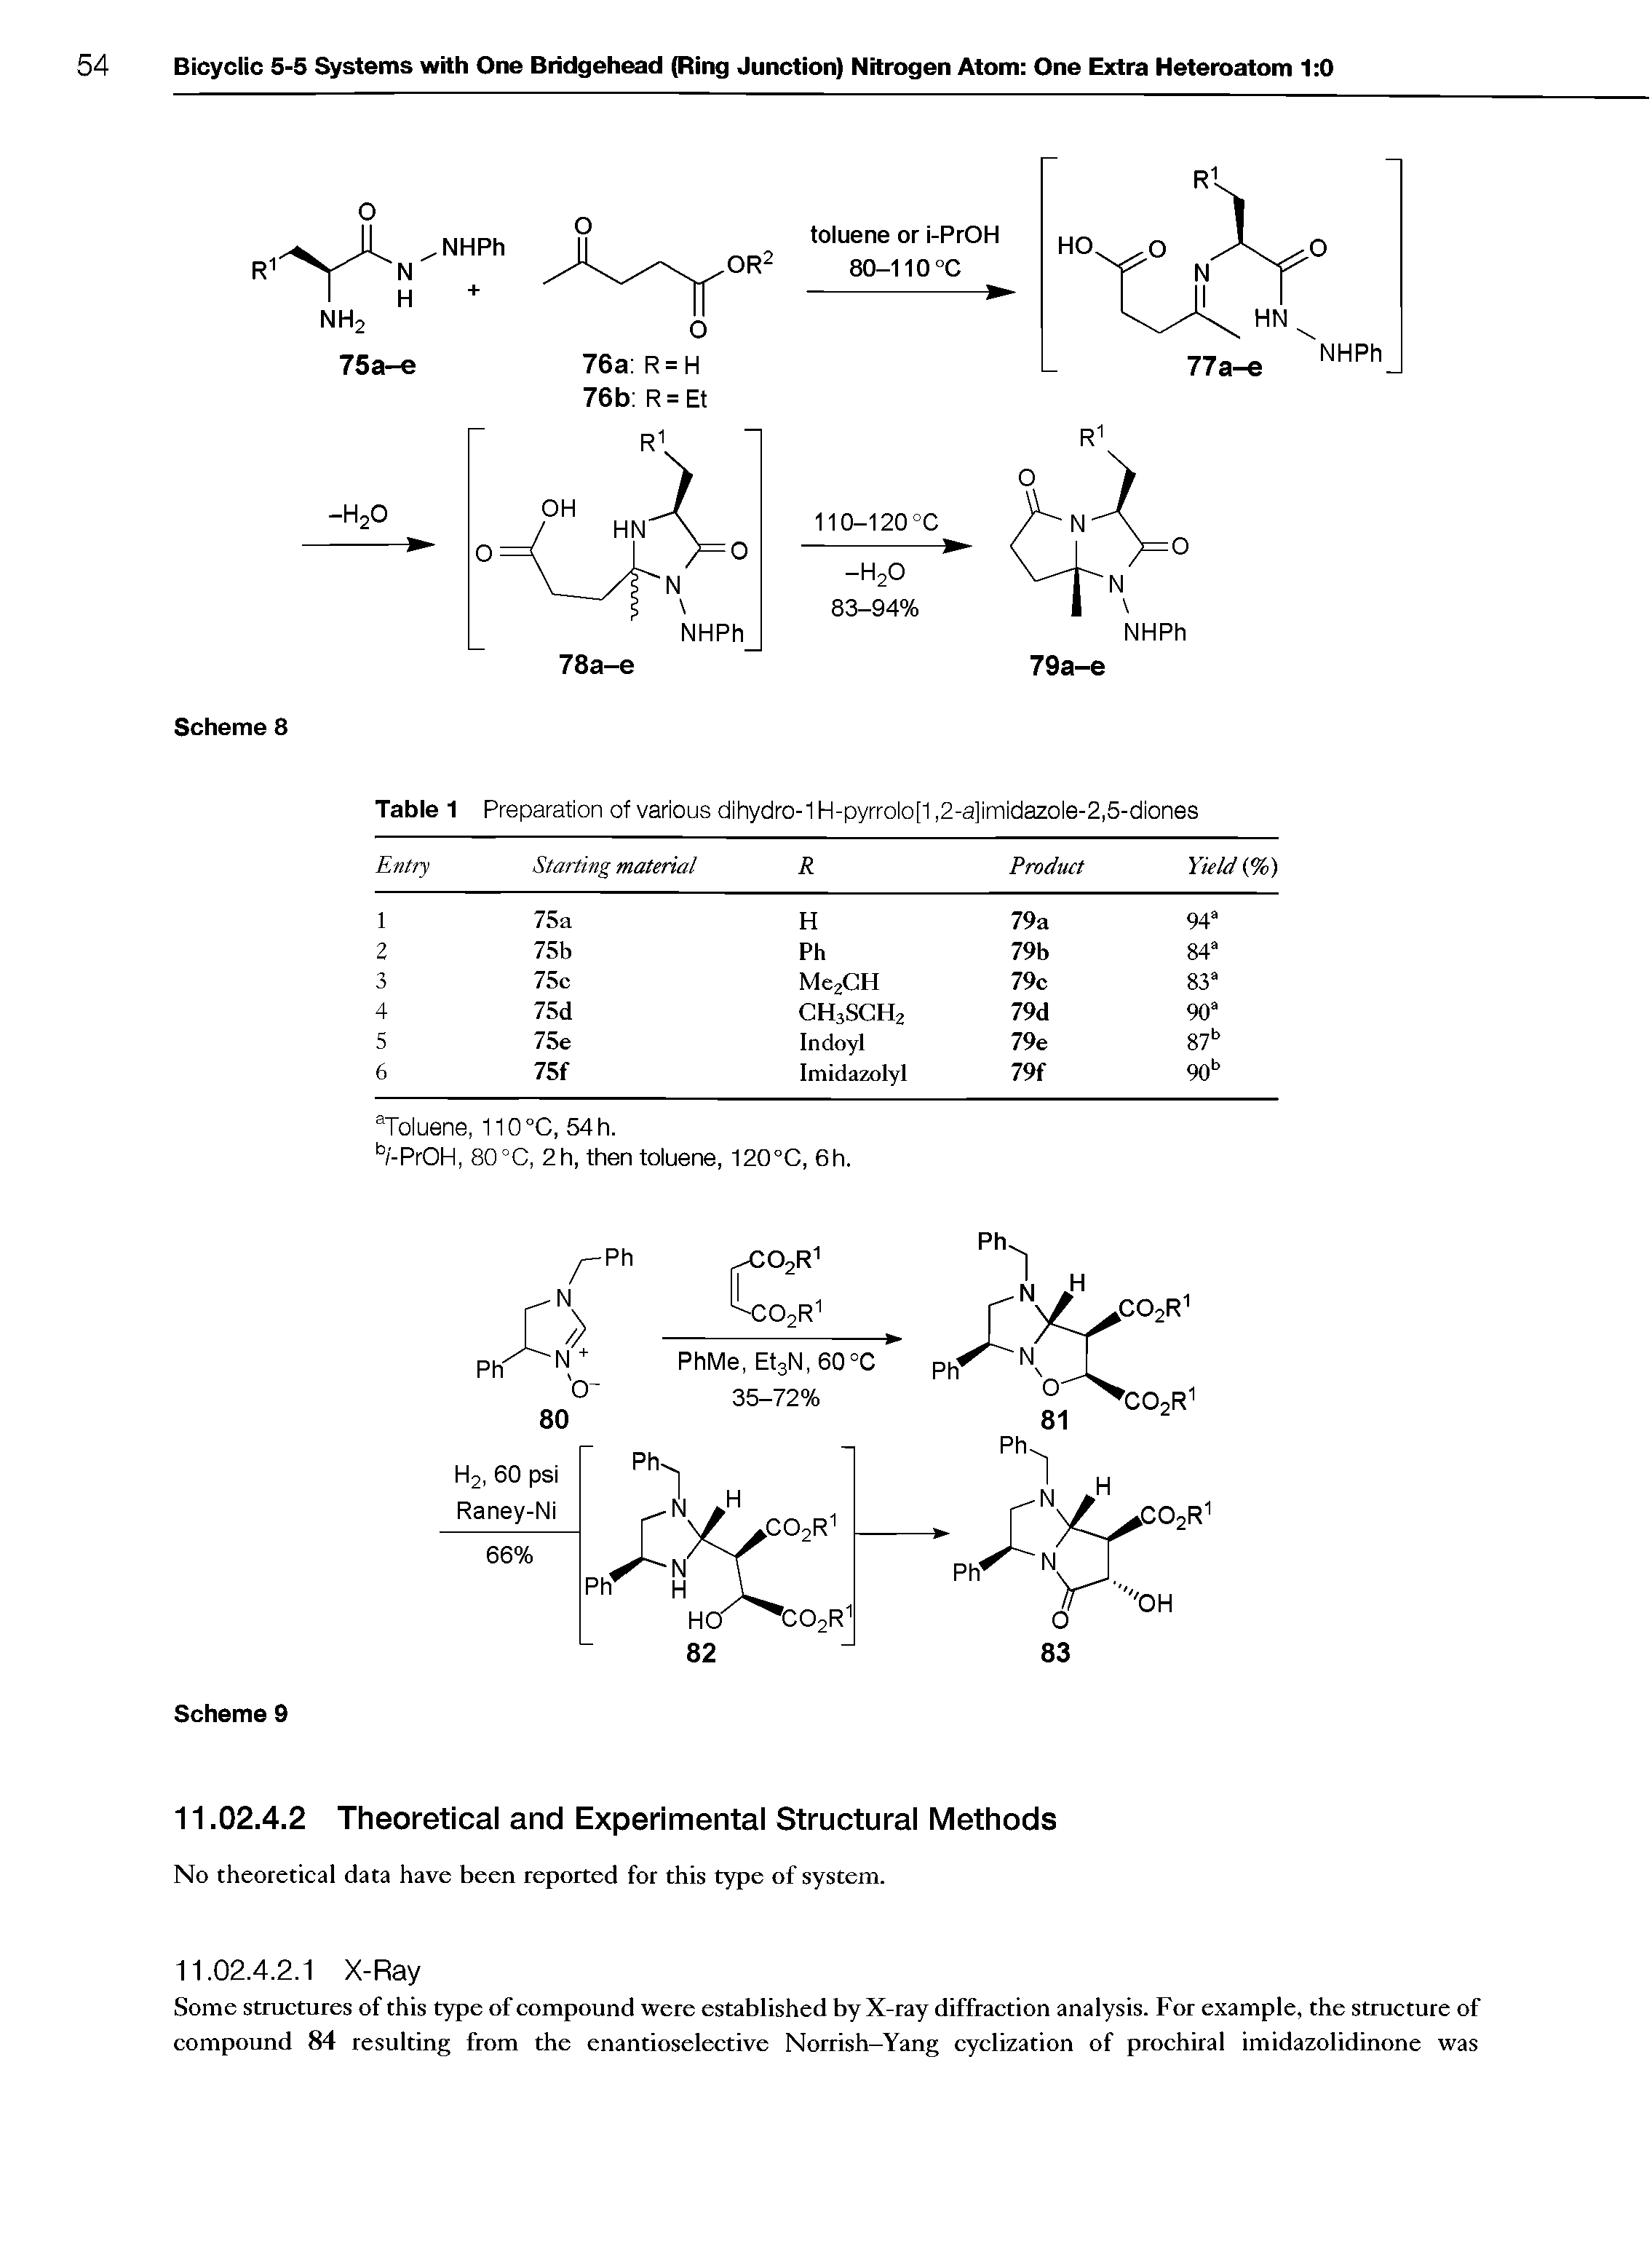 Table 1 Preparation of various dihydro-1 H-pyrrolo[1,2-a]imidazole-2,5-diones...